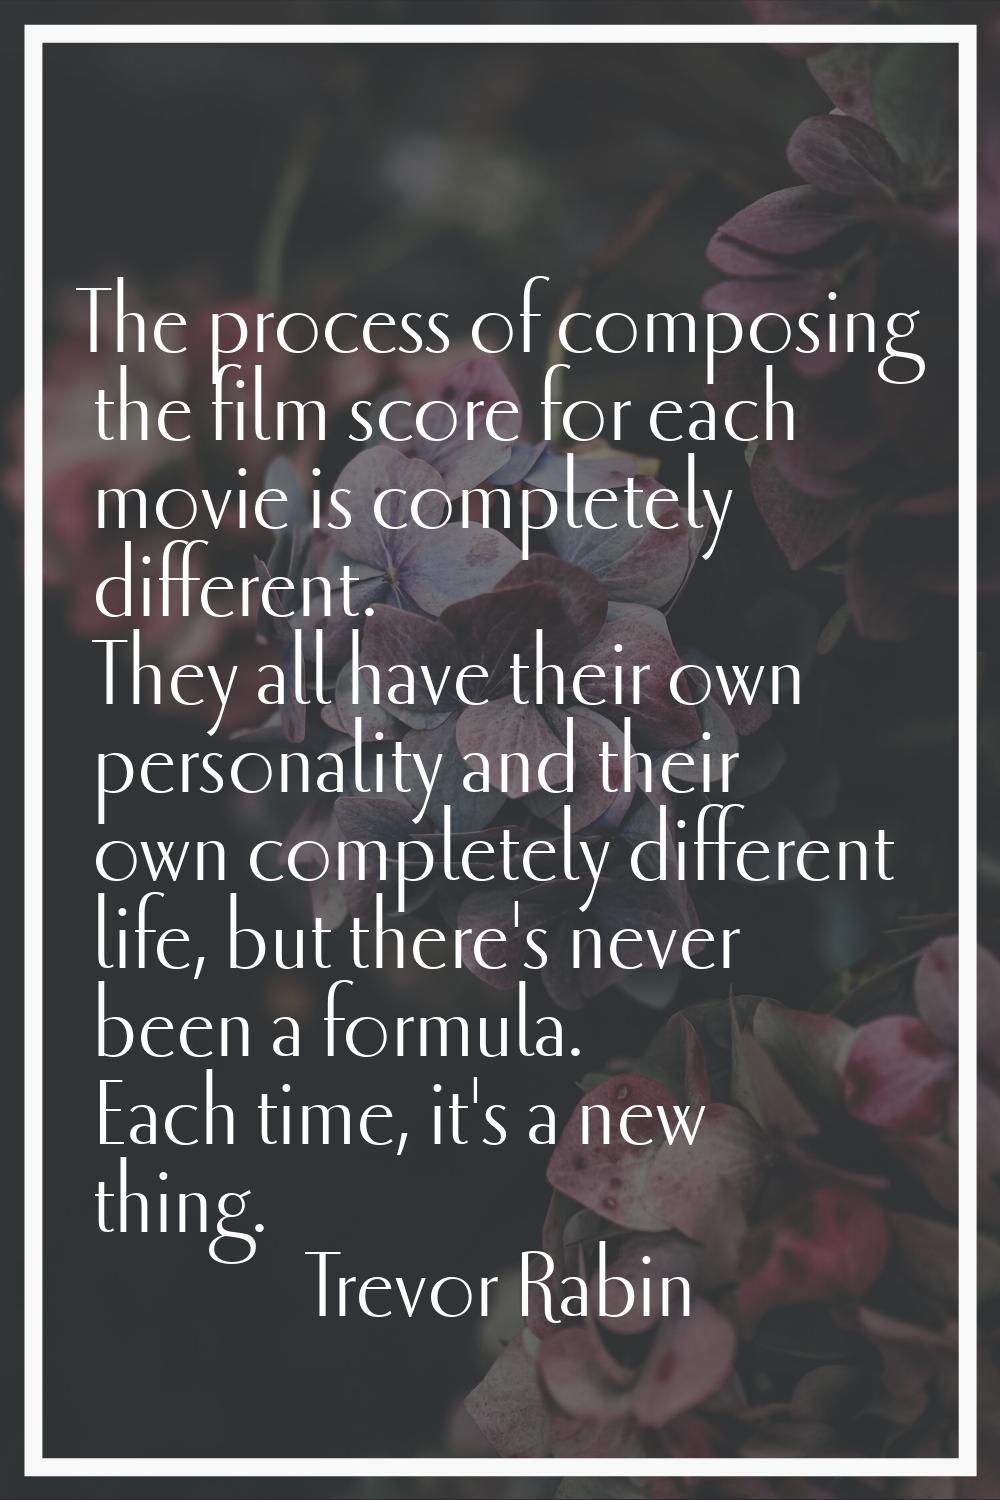 The process of composing the film score for each movie is completely different. They all have their